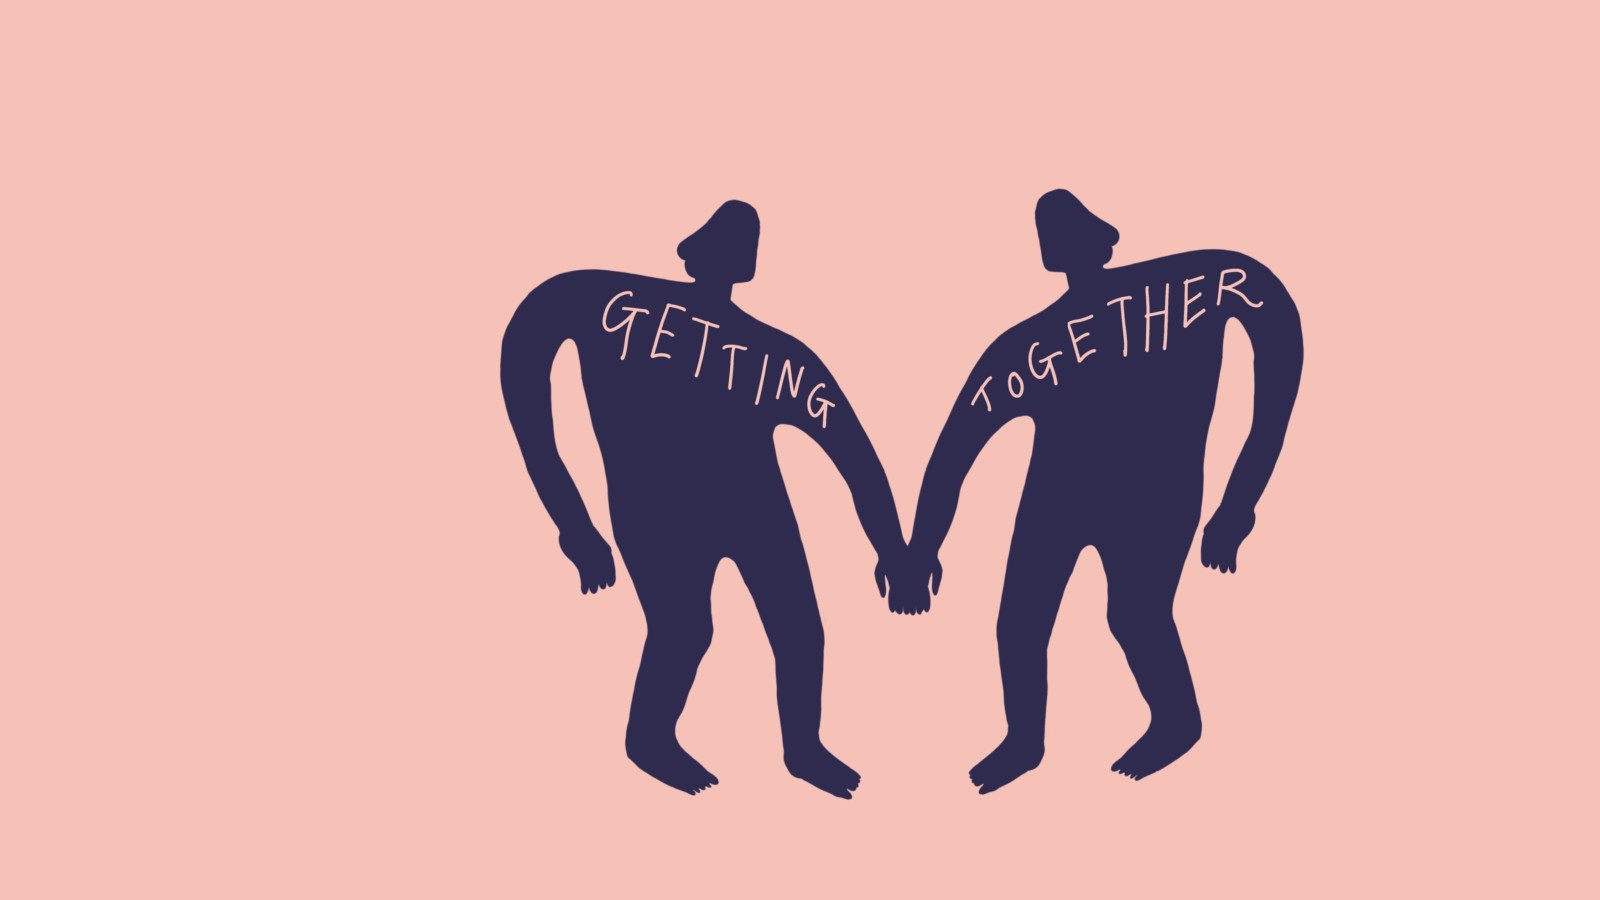 On a light pink background, 2 navy blue silhouettes with shoulder length hair loosely hold hands. In light pink hand written letters, the words 'Getting Together' are written, one word on each silhouette's upper body.